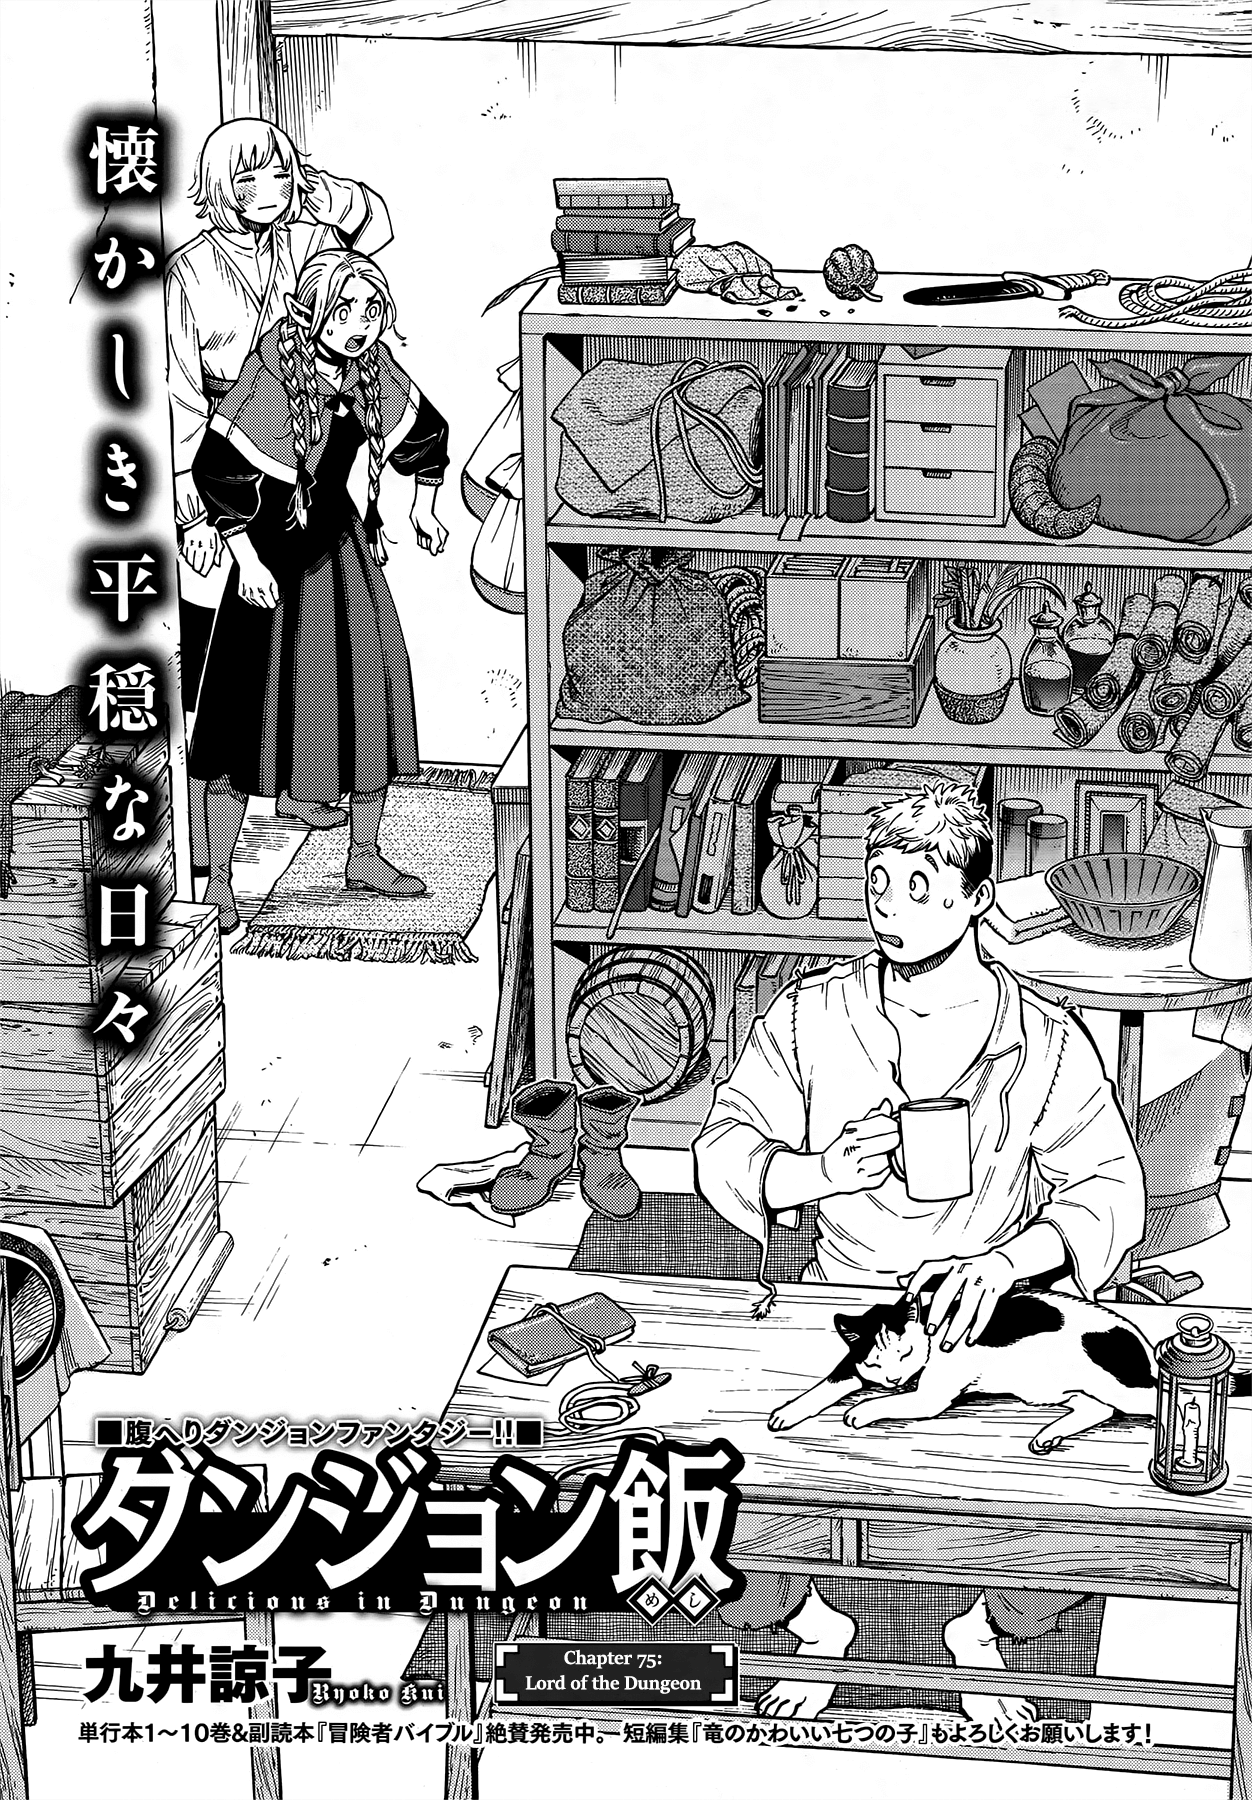 Dungeon Meshi Vol.11-Chapter.75-Lord-of-the-Dungeon Image